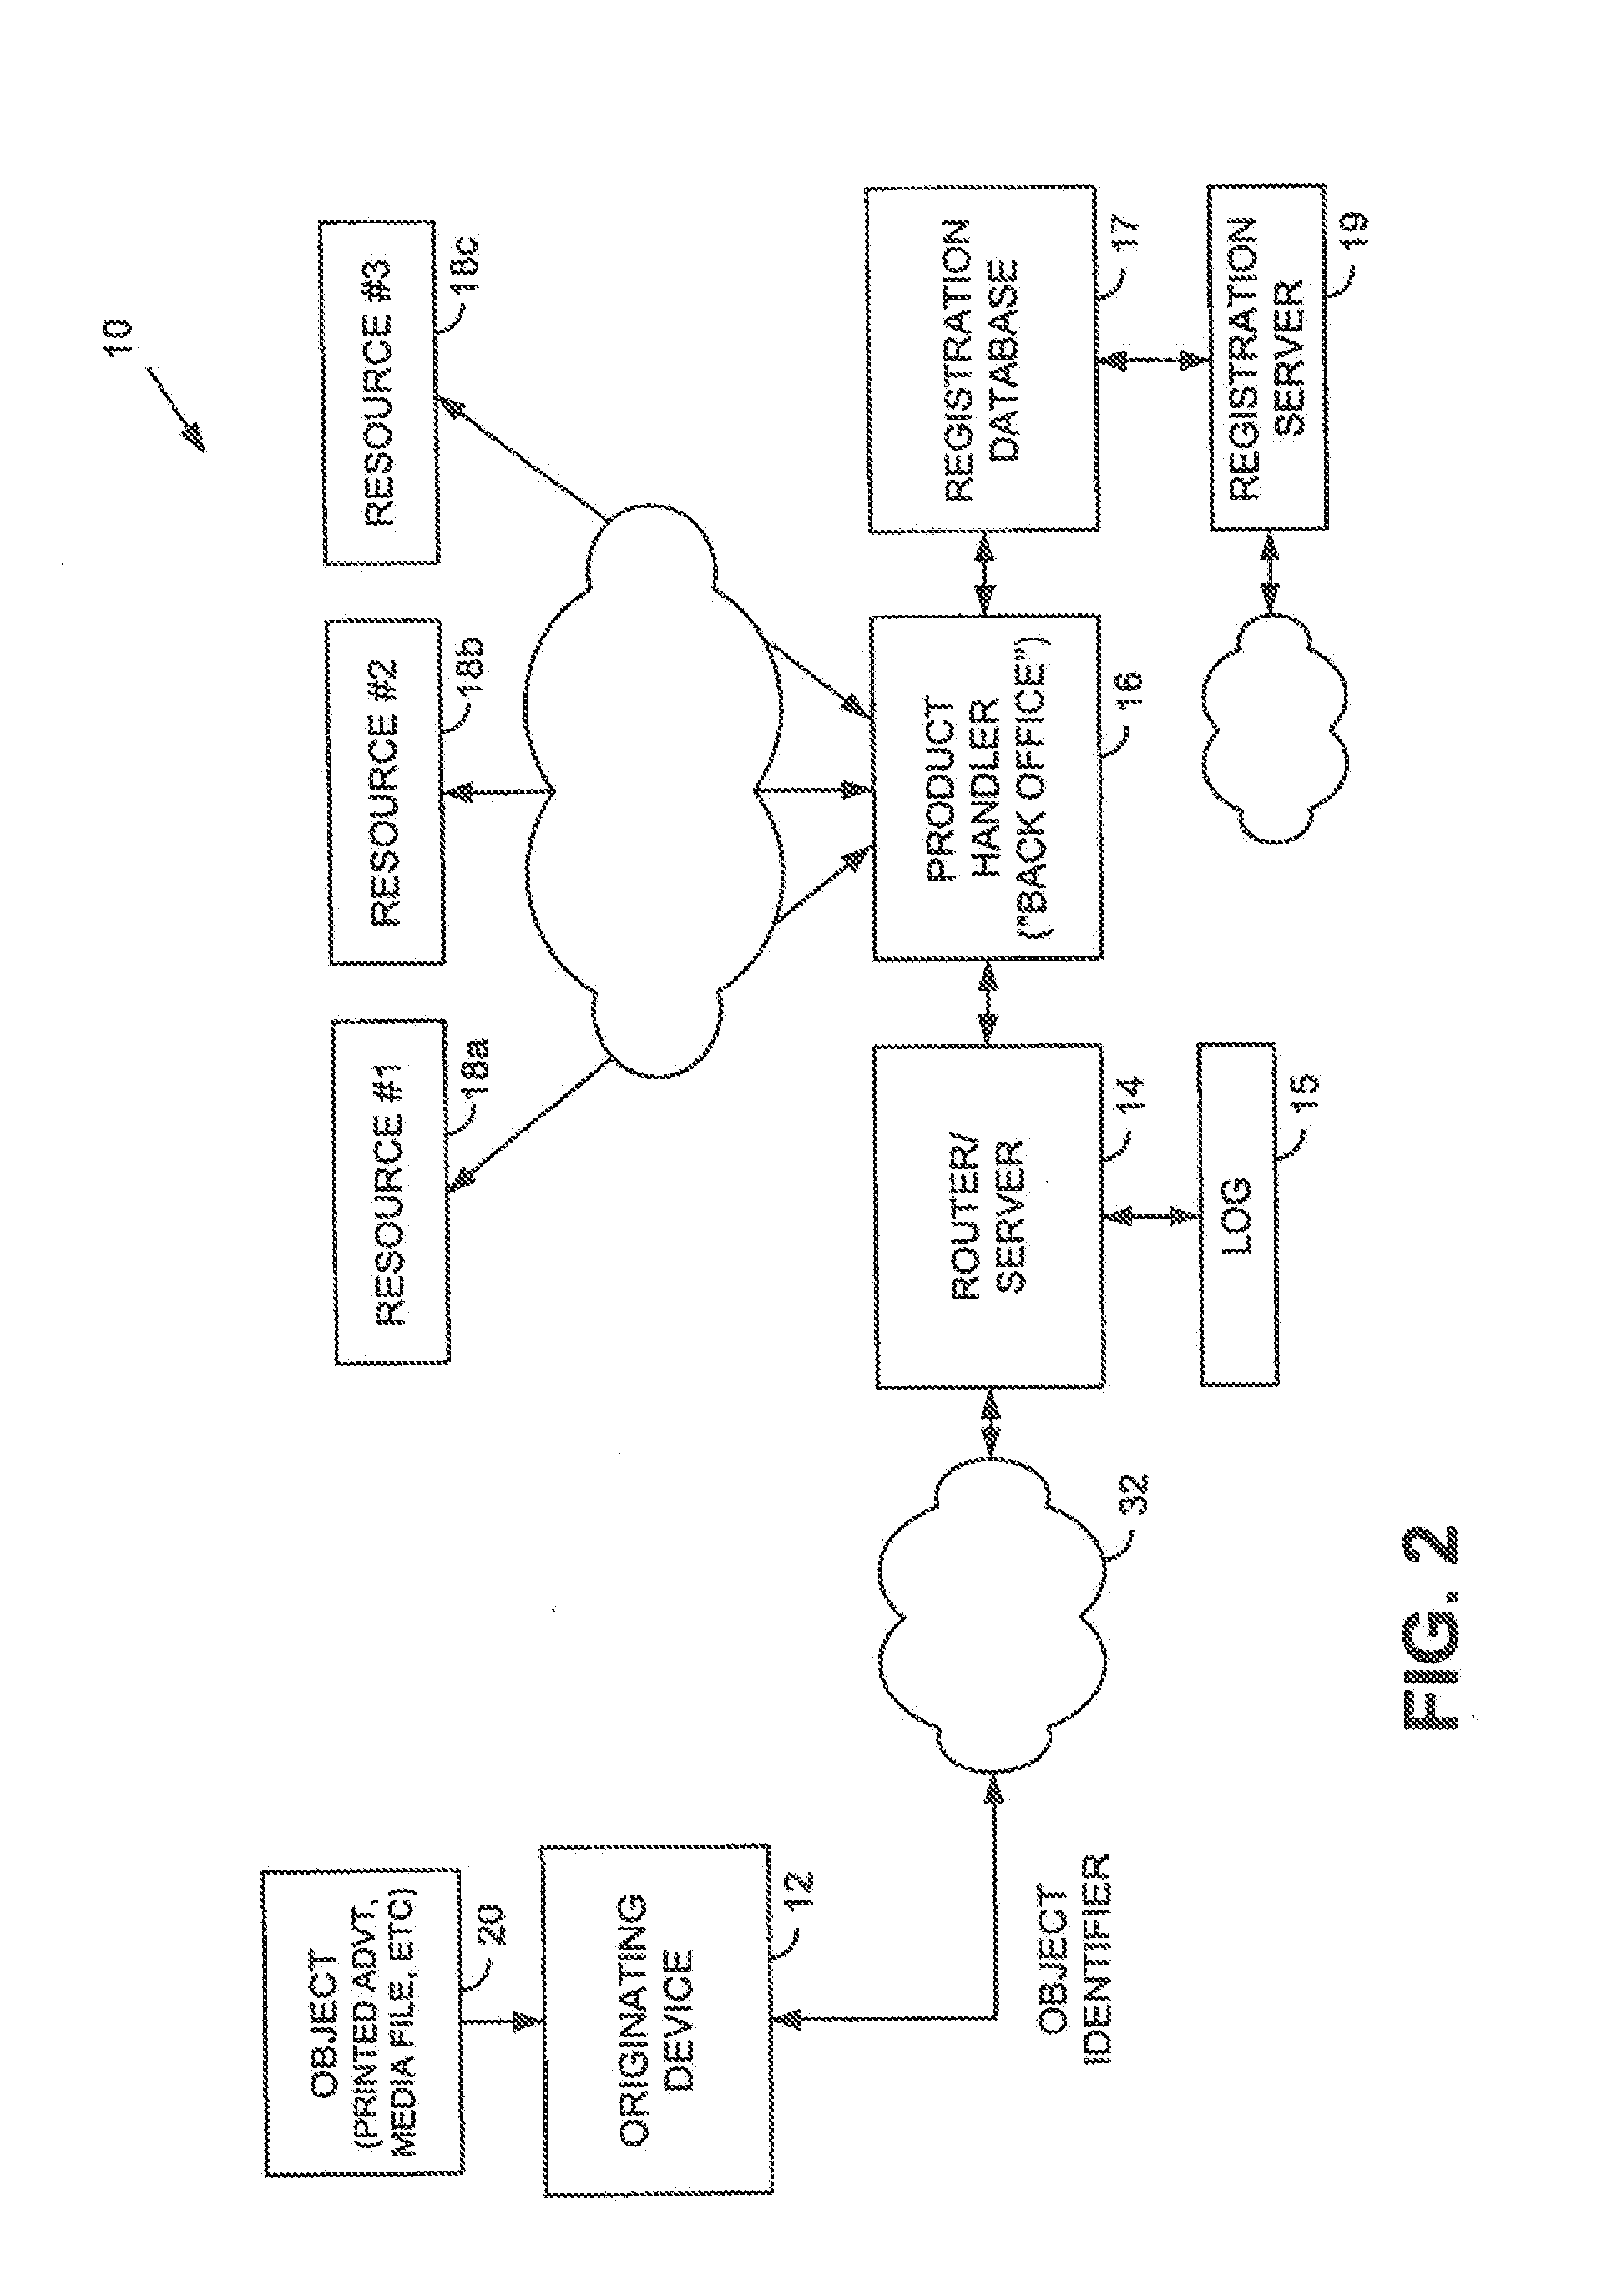 Location-Based Arrangements Employing Mobile Devices